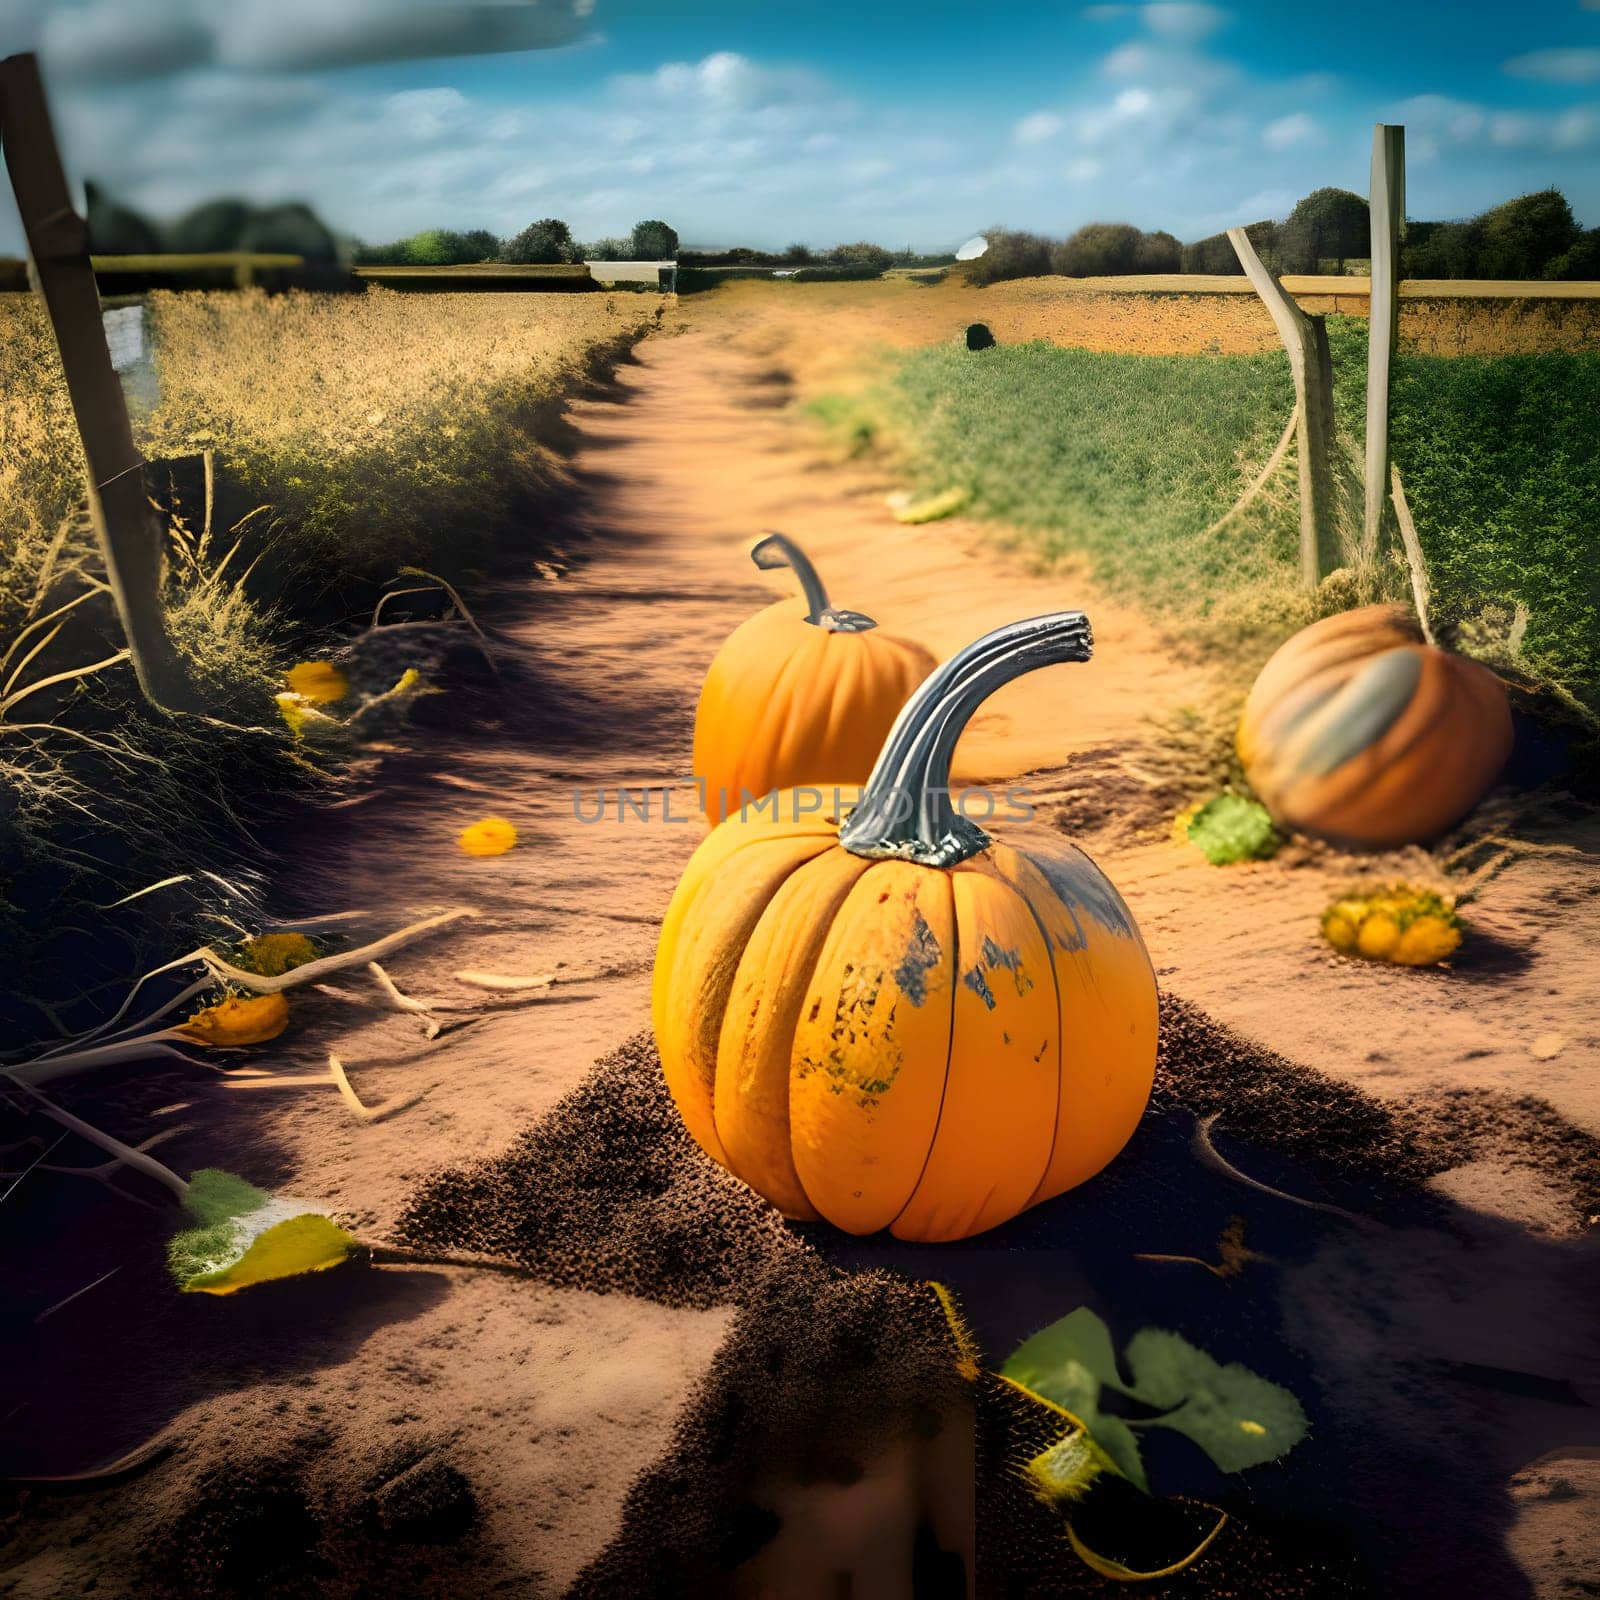 Pumpkins on the path. Pumpkin as a dish of thanksgiving for the harvest. An atmosphere of joy and celebration.